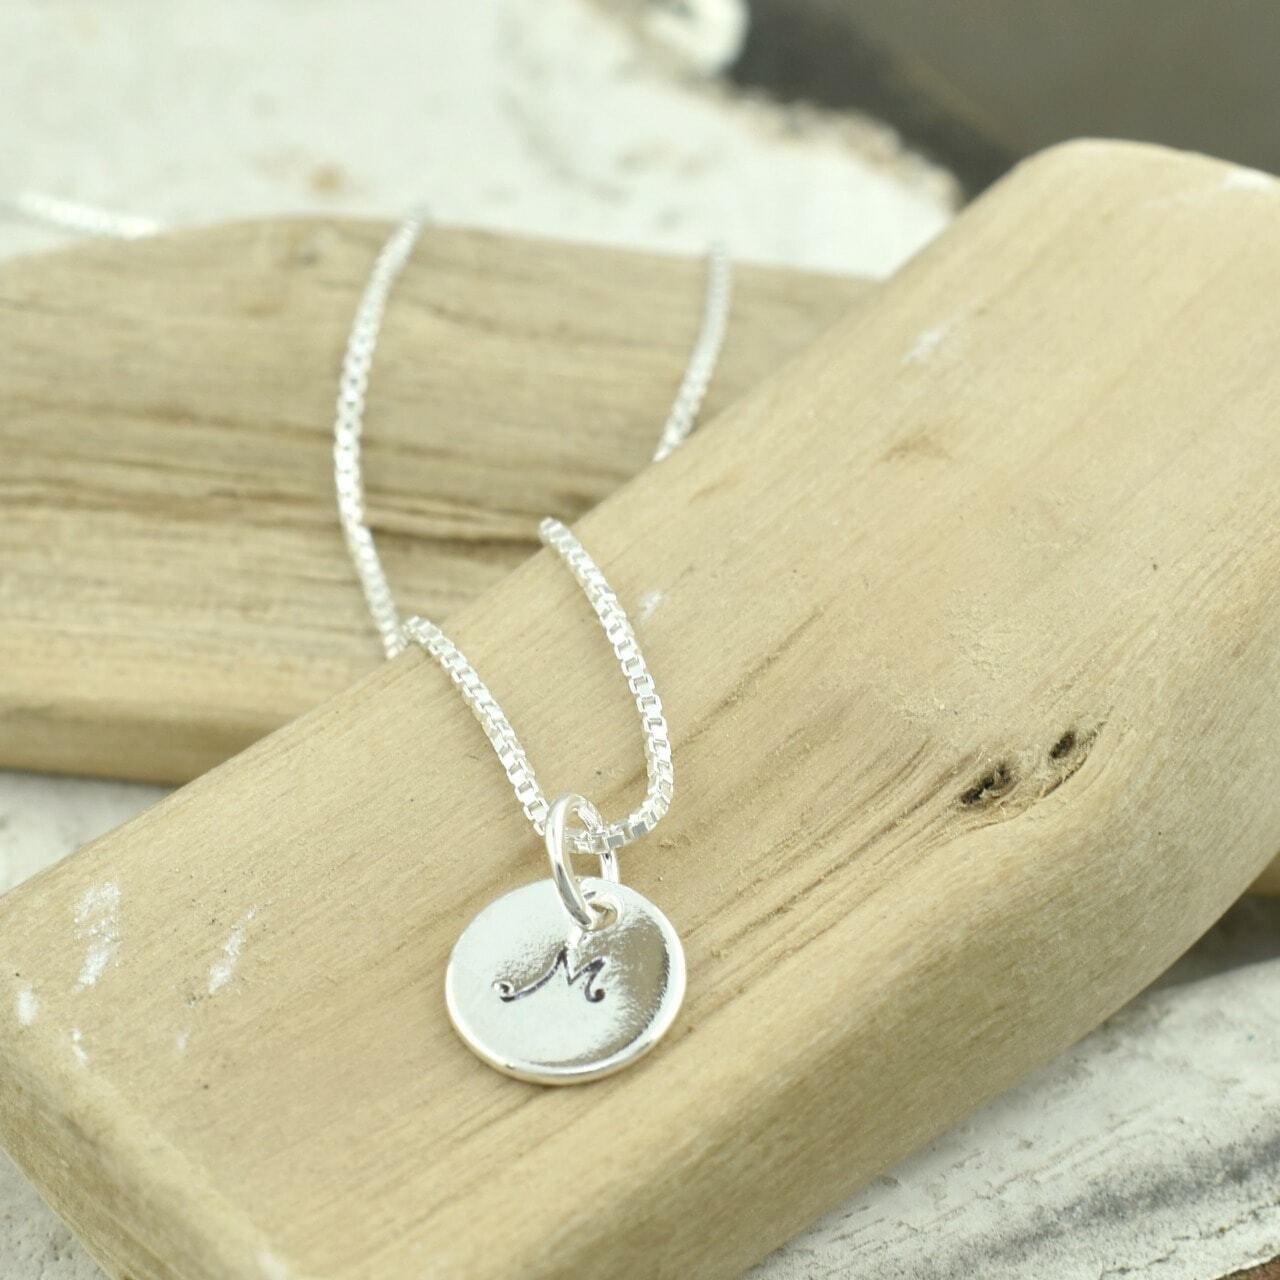 Hand stamped .925 sterling silver necklace